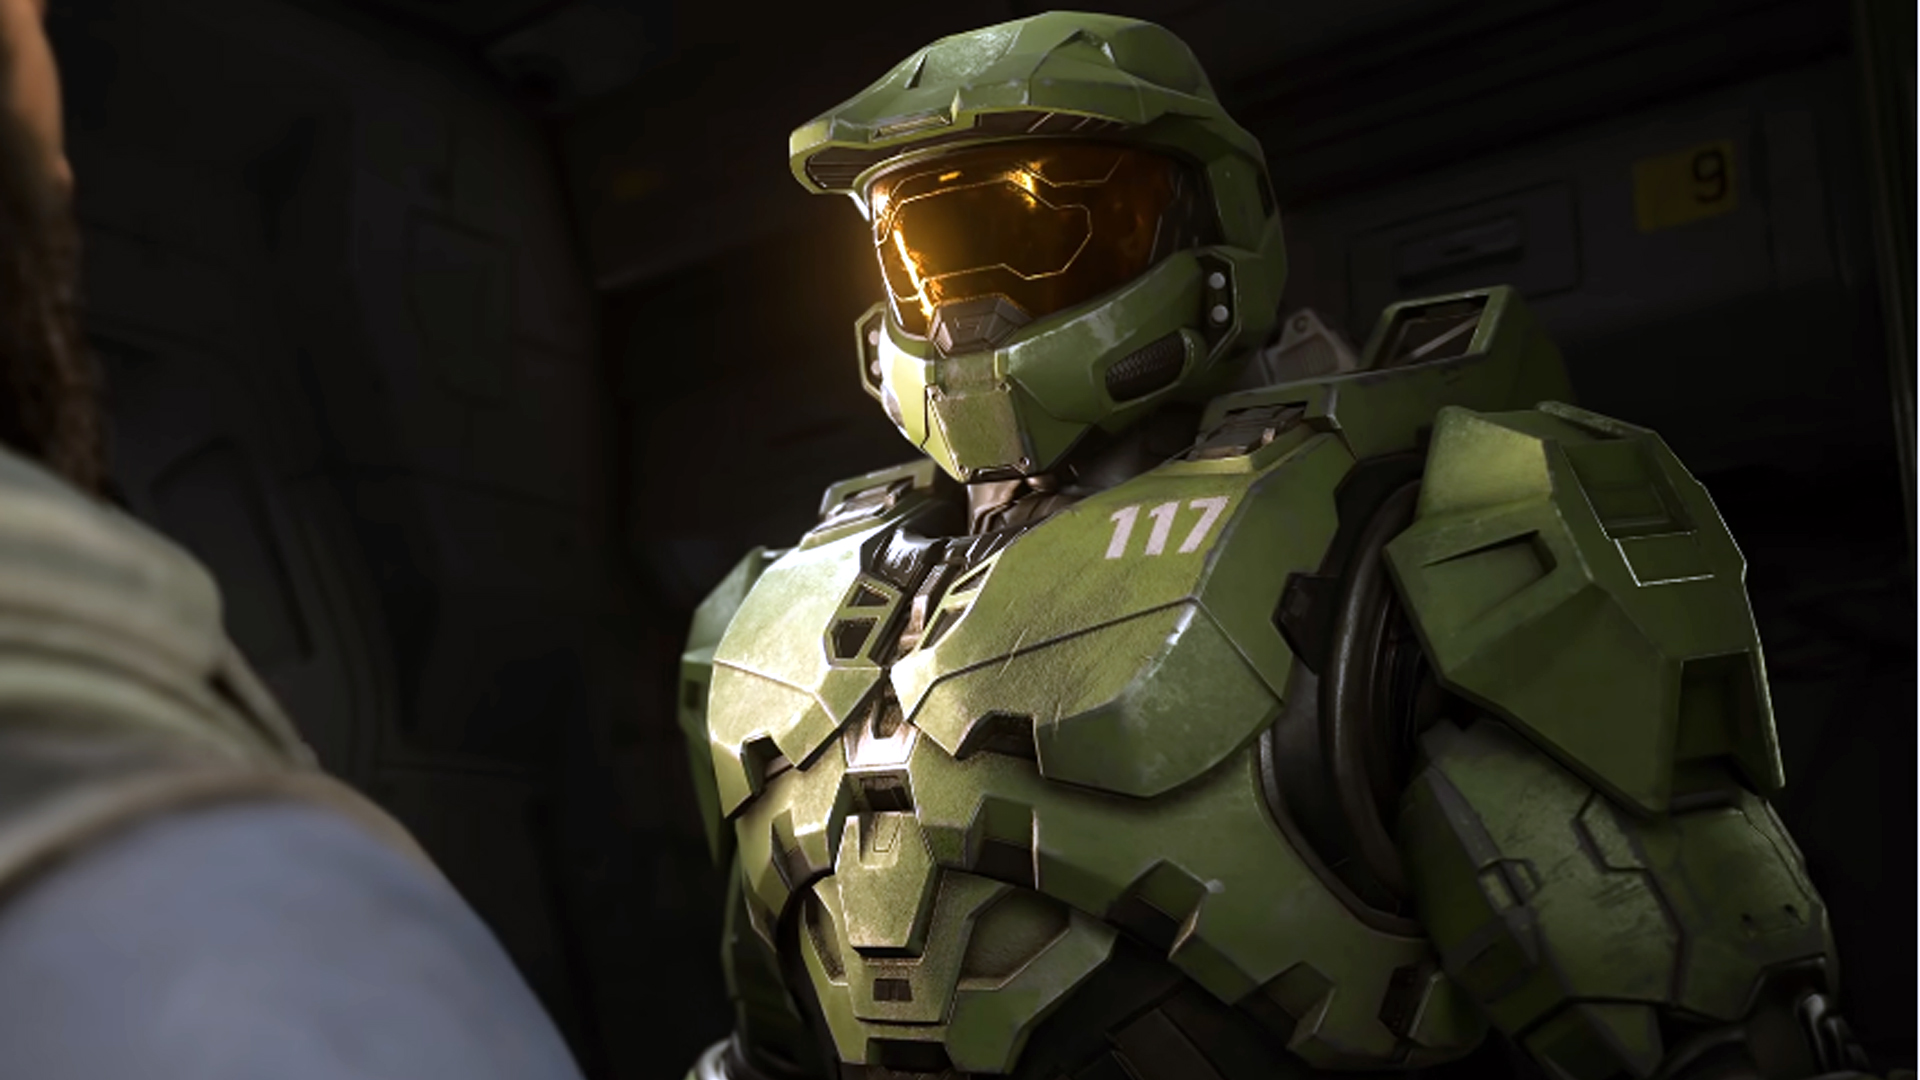 Halo Infinite’s campaign wasn’t at Gamescom because 343 is busy bug squashing